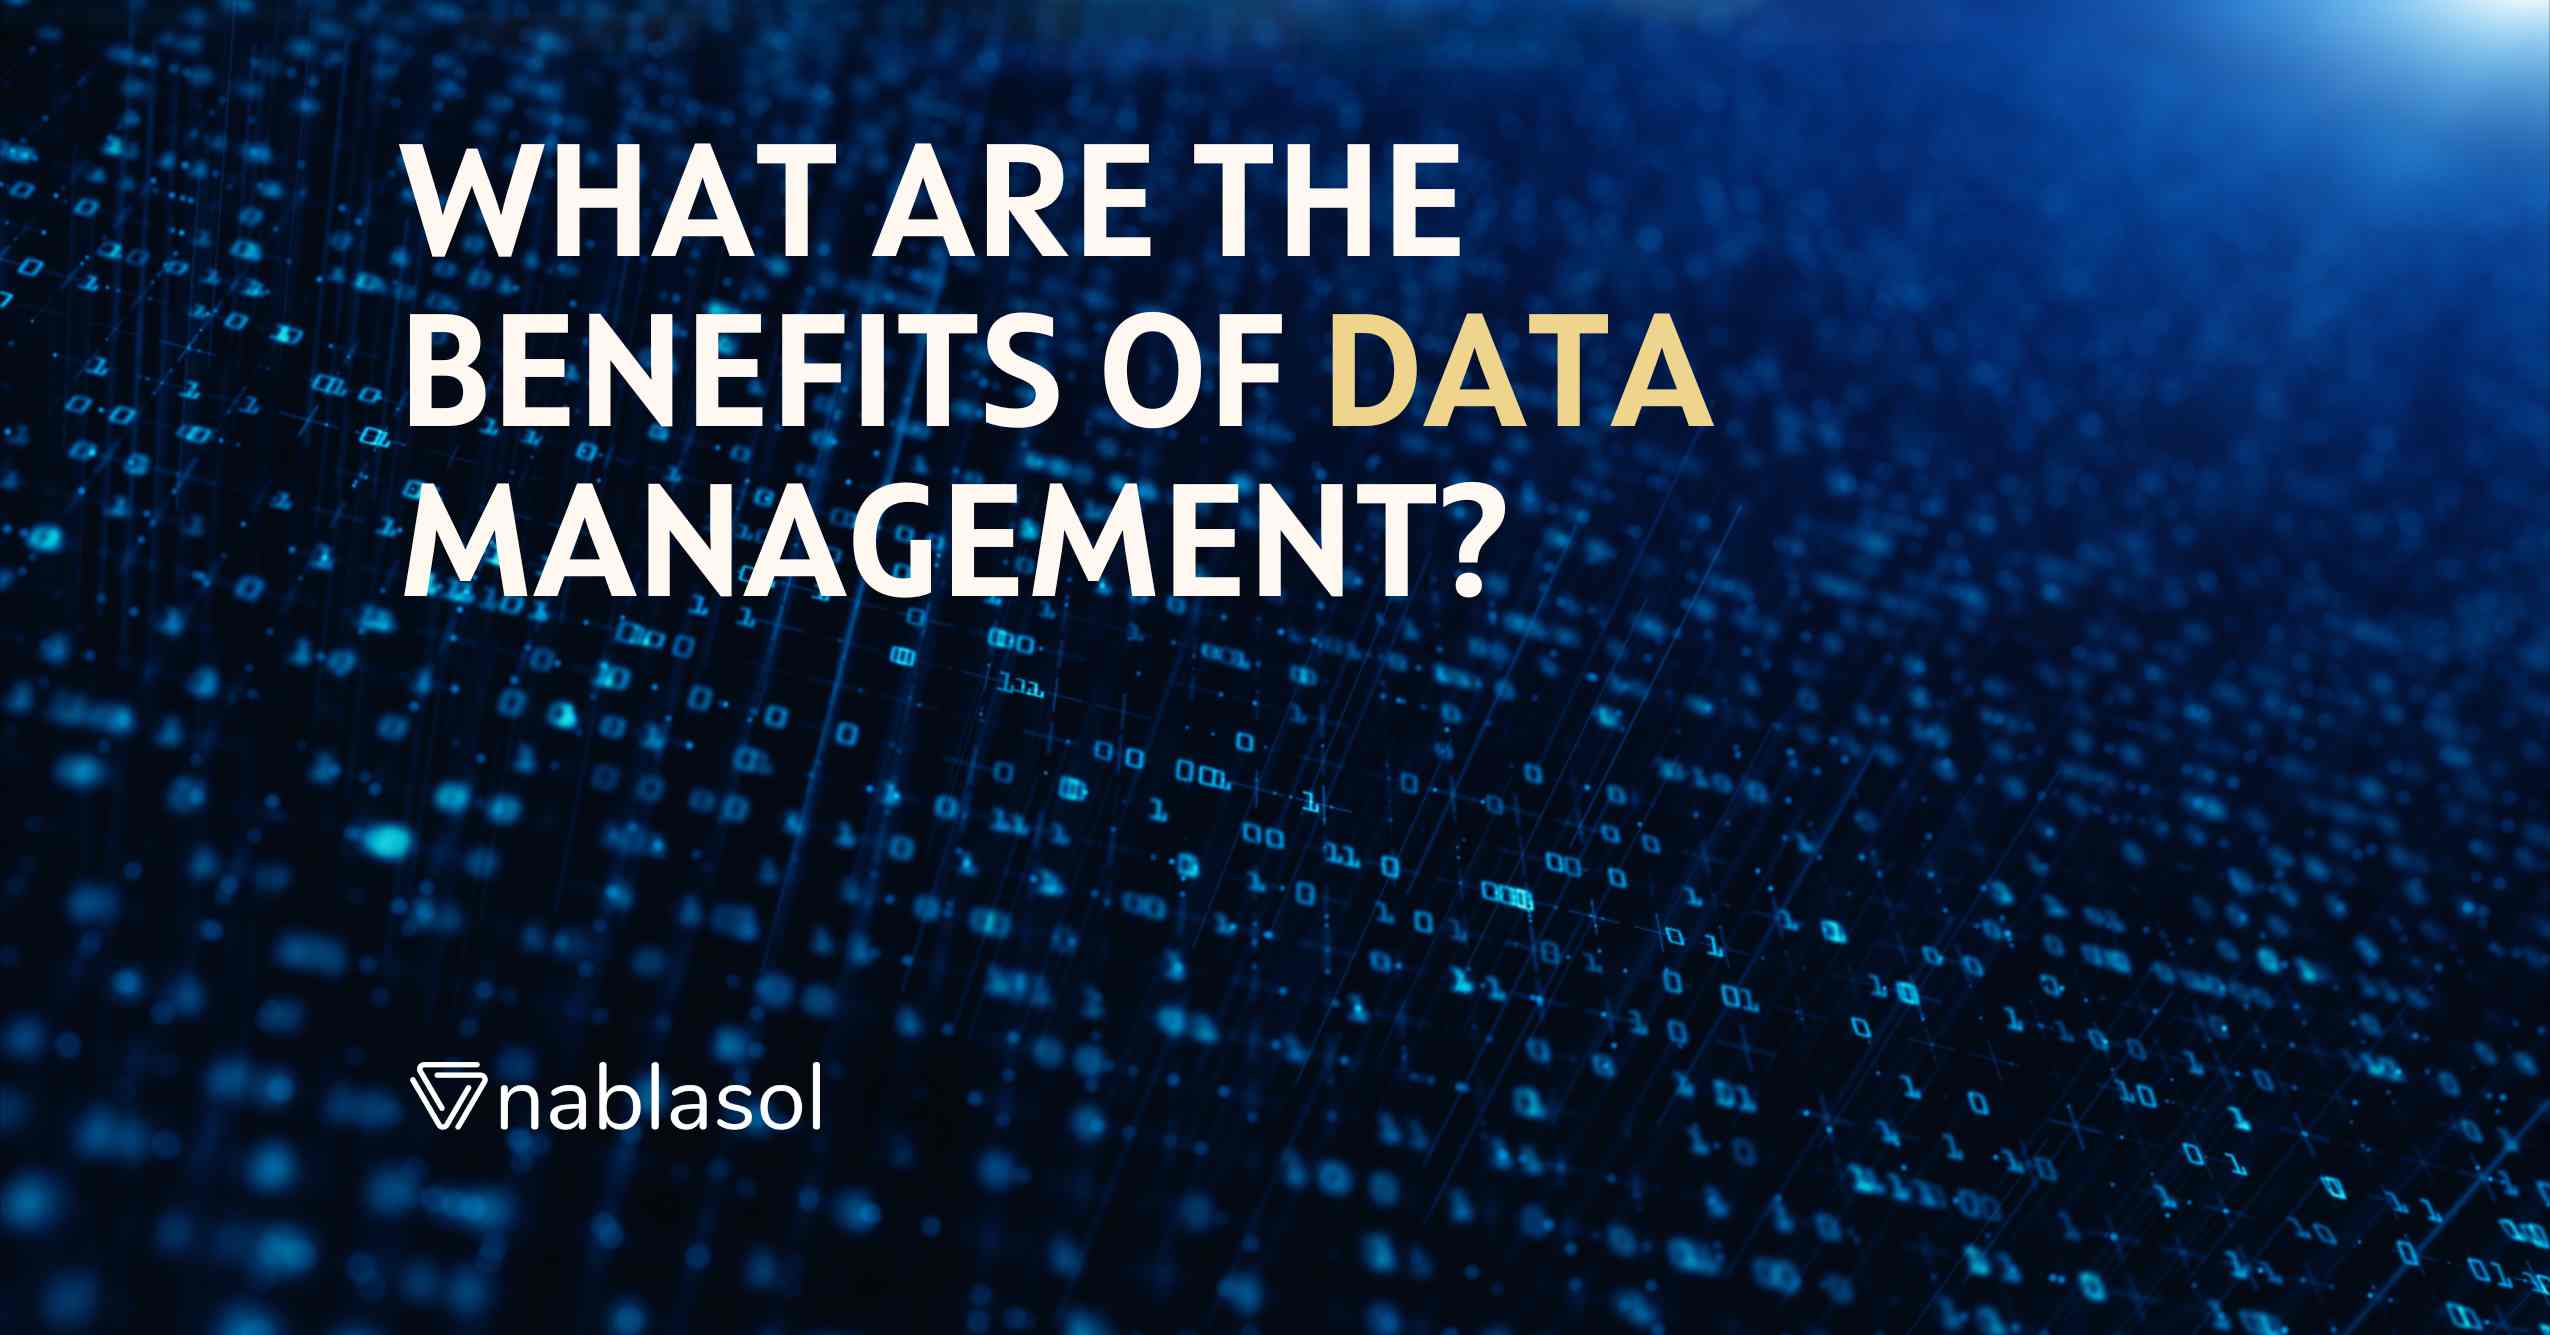 What Are The Benefits Of Data Management?